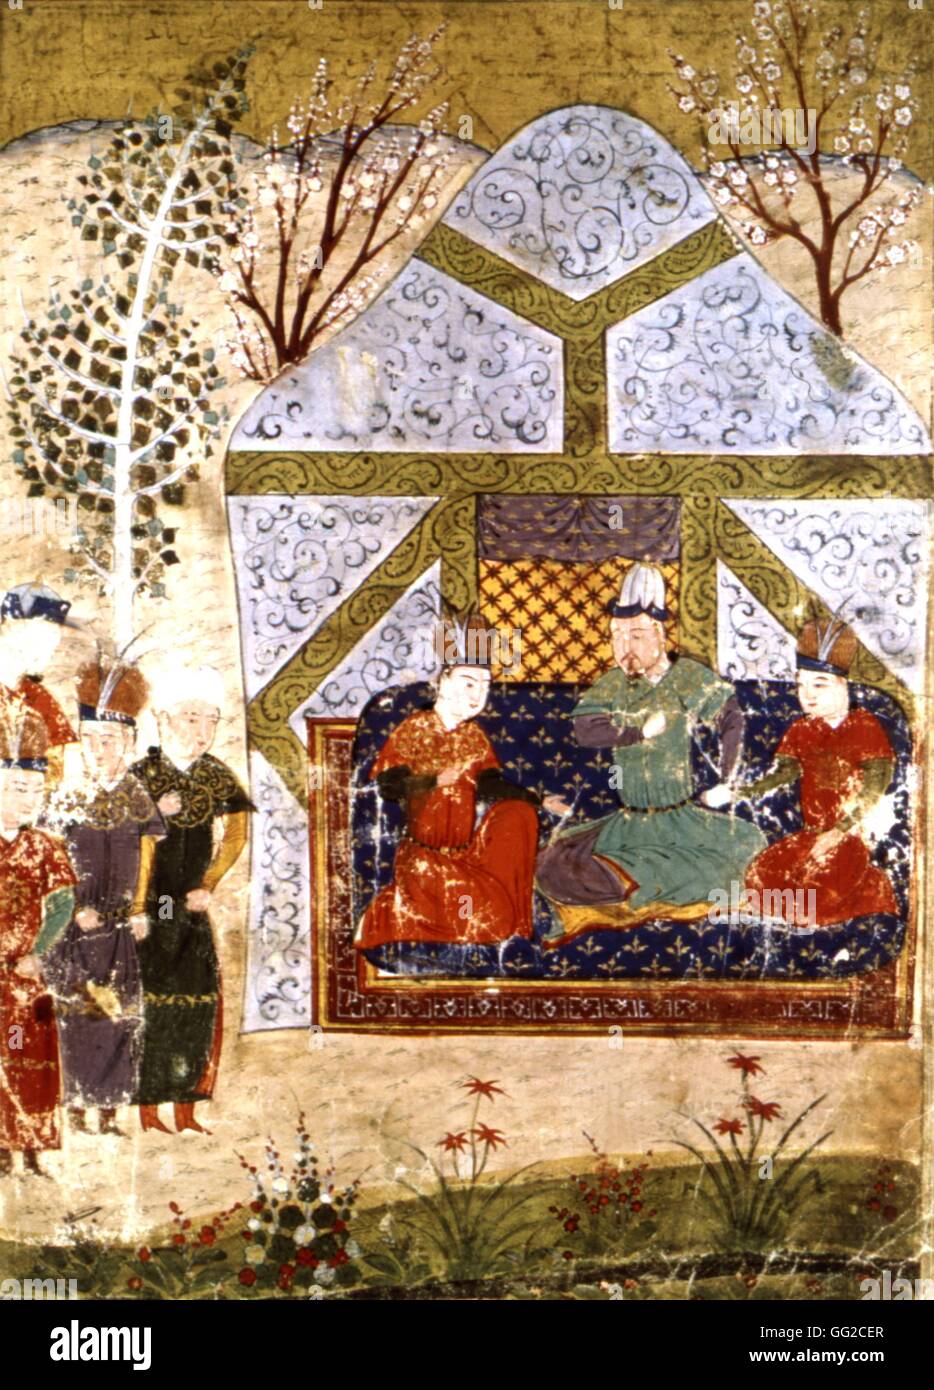 Persian manuscript illustrated with 106 paintings: 'Jami'al Tawarikh' by Rachid ad-Dîn (History of the Mongols). Gengis Khan's third son on his throne, surrounded by his children.  Persian school 14th century Stock Photo